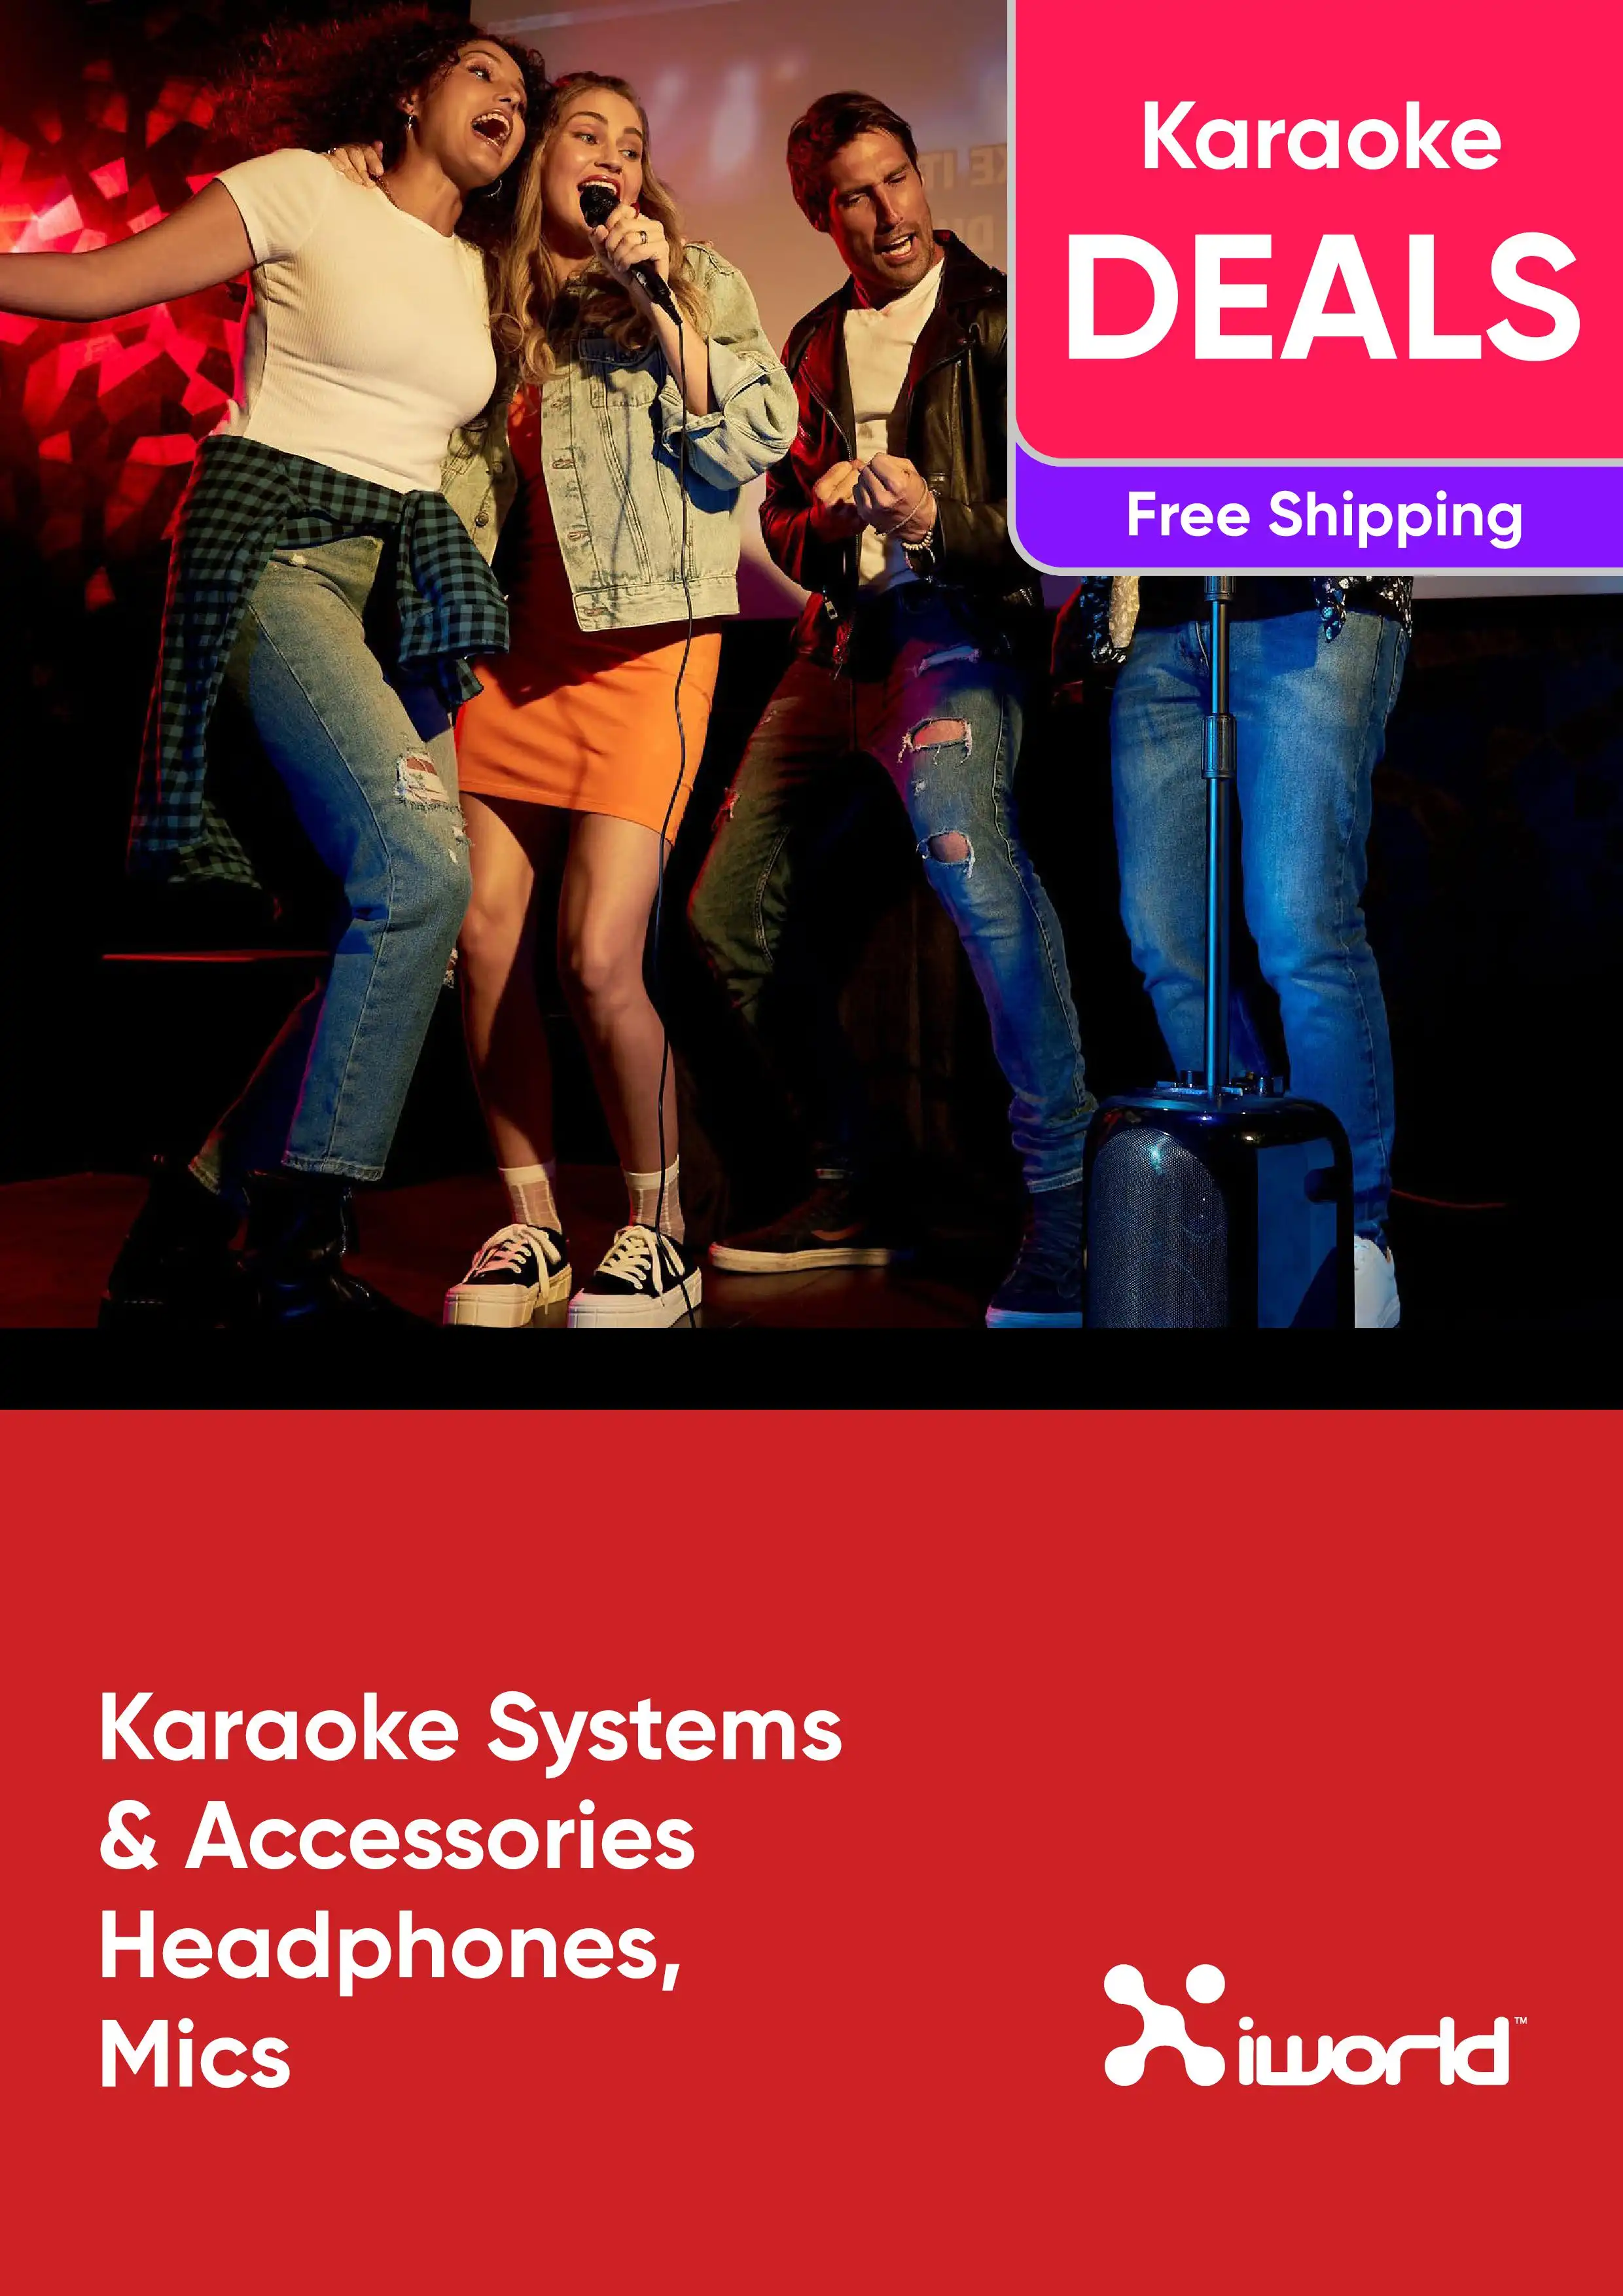 Karaoke Systems and Accessory Sale: Singing Machines, Microphones, Headphones and More